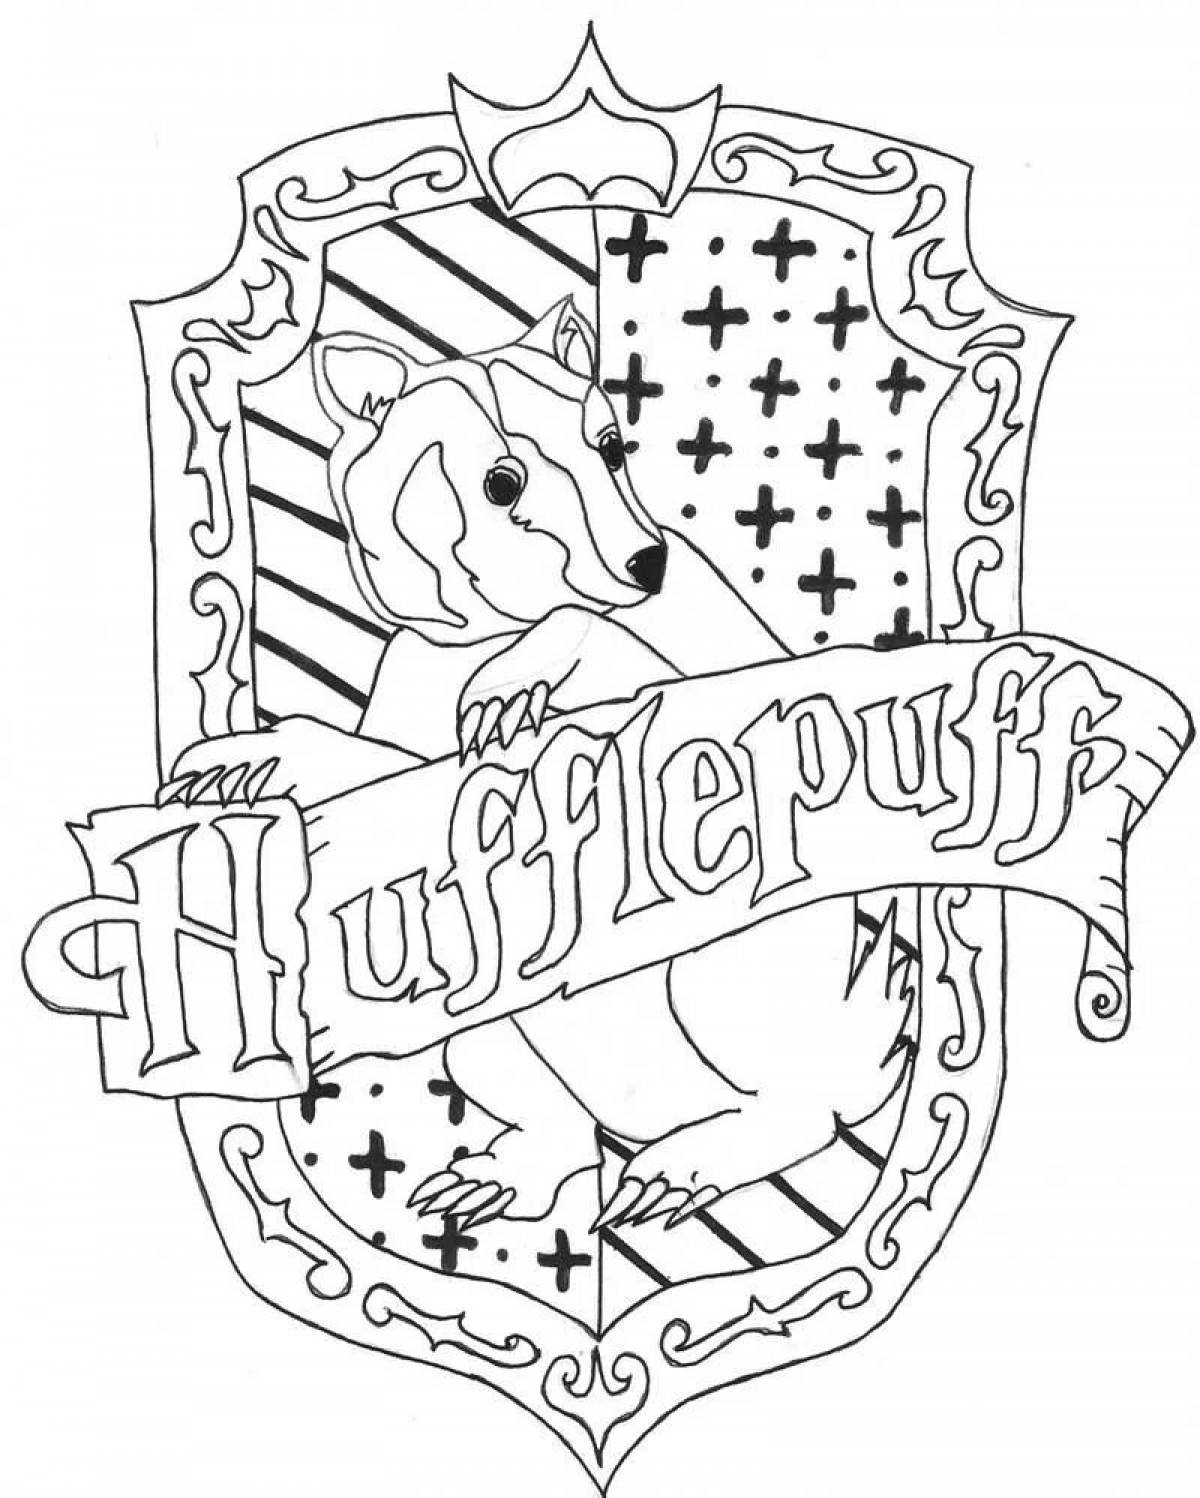 Colorful coat of arms of Hogwarts coloring book